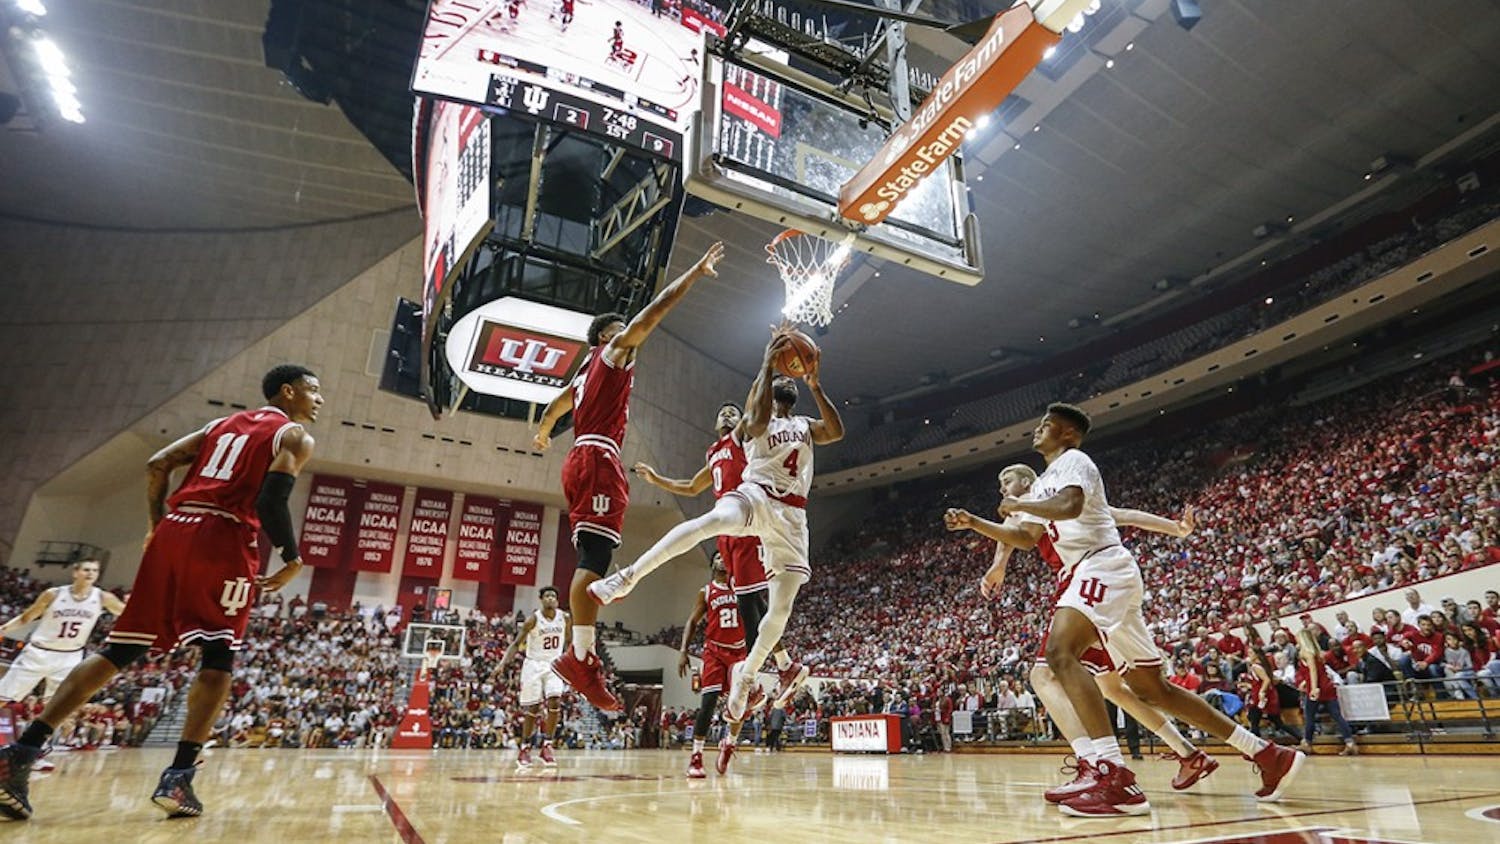 Senior guard Robert Johnson goes up for a layup during the Hoosier Hysteria scrimmage on Oct. 21. Johnson is one of several IU men's basketball seniors in their final year with the program.